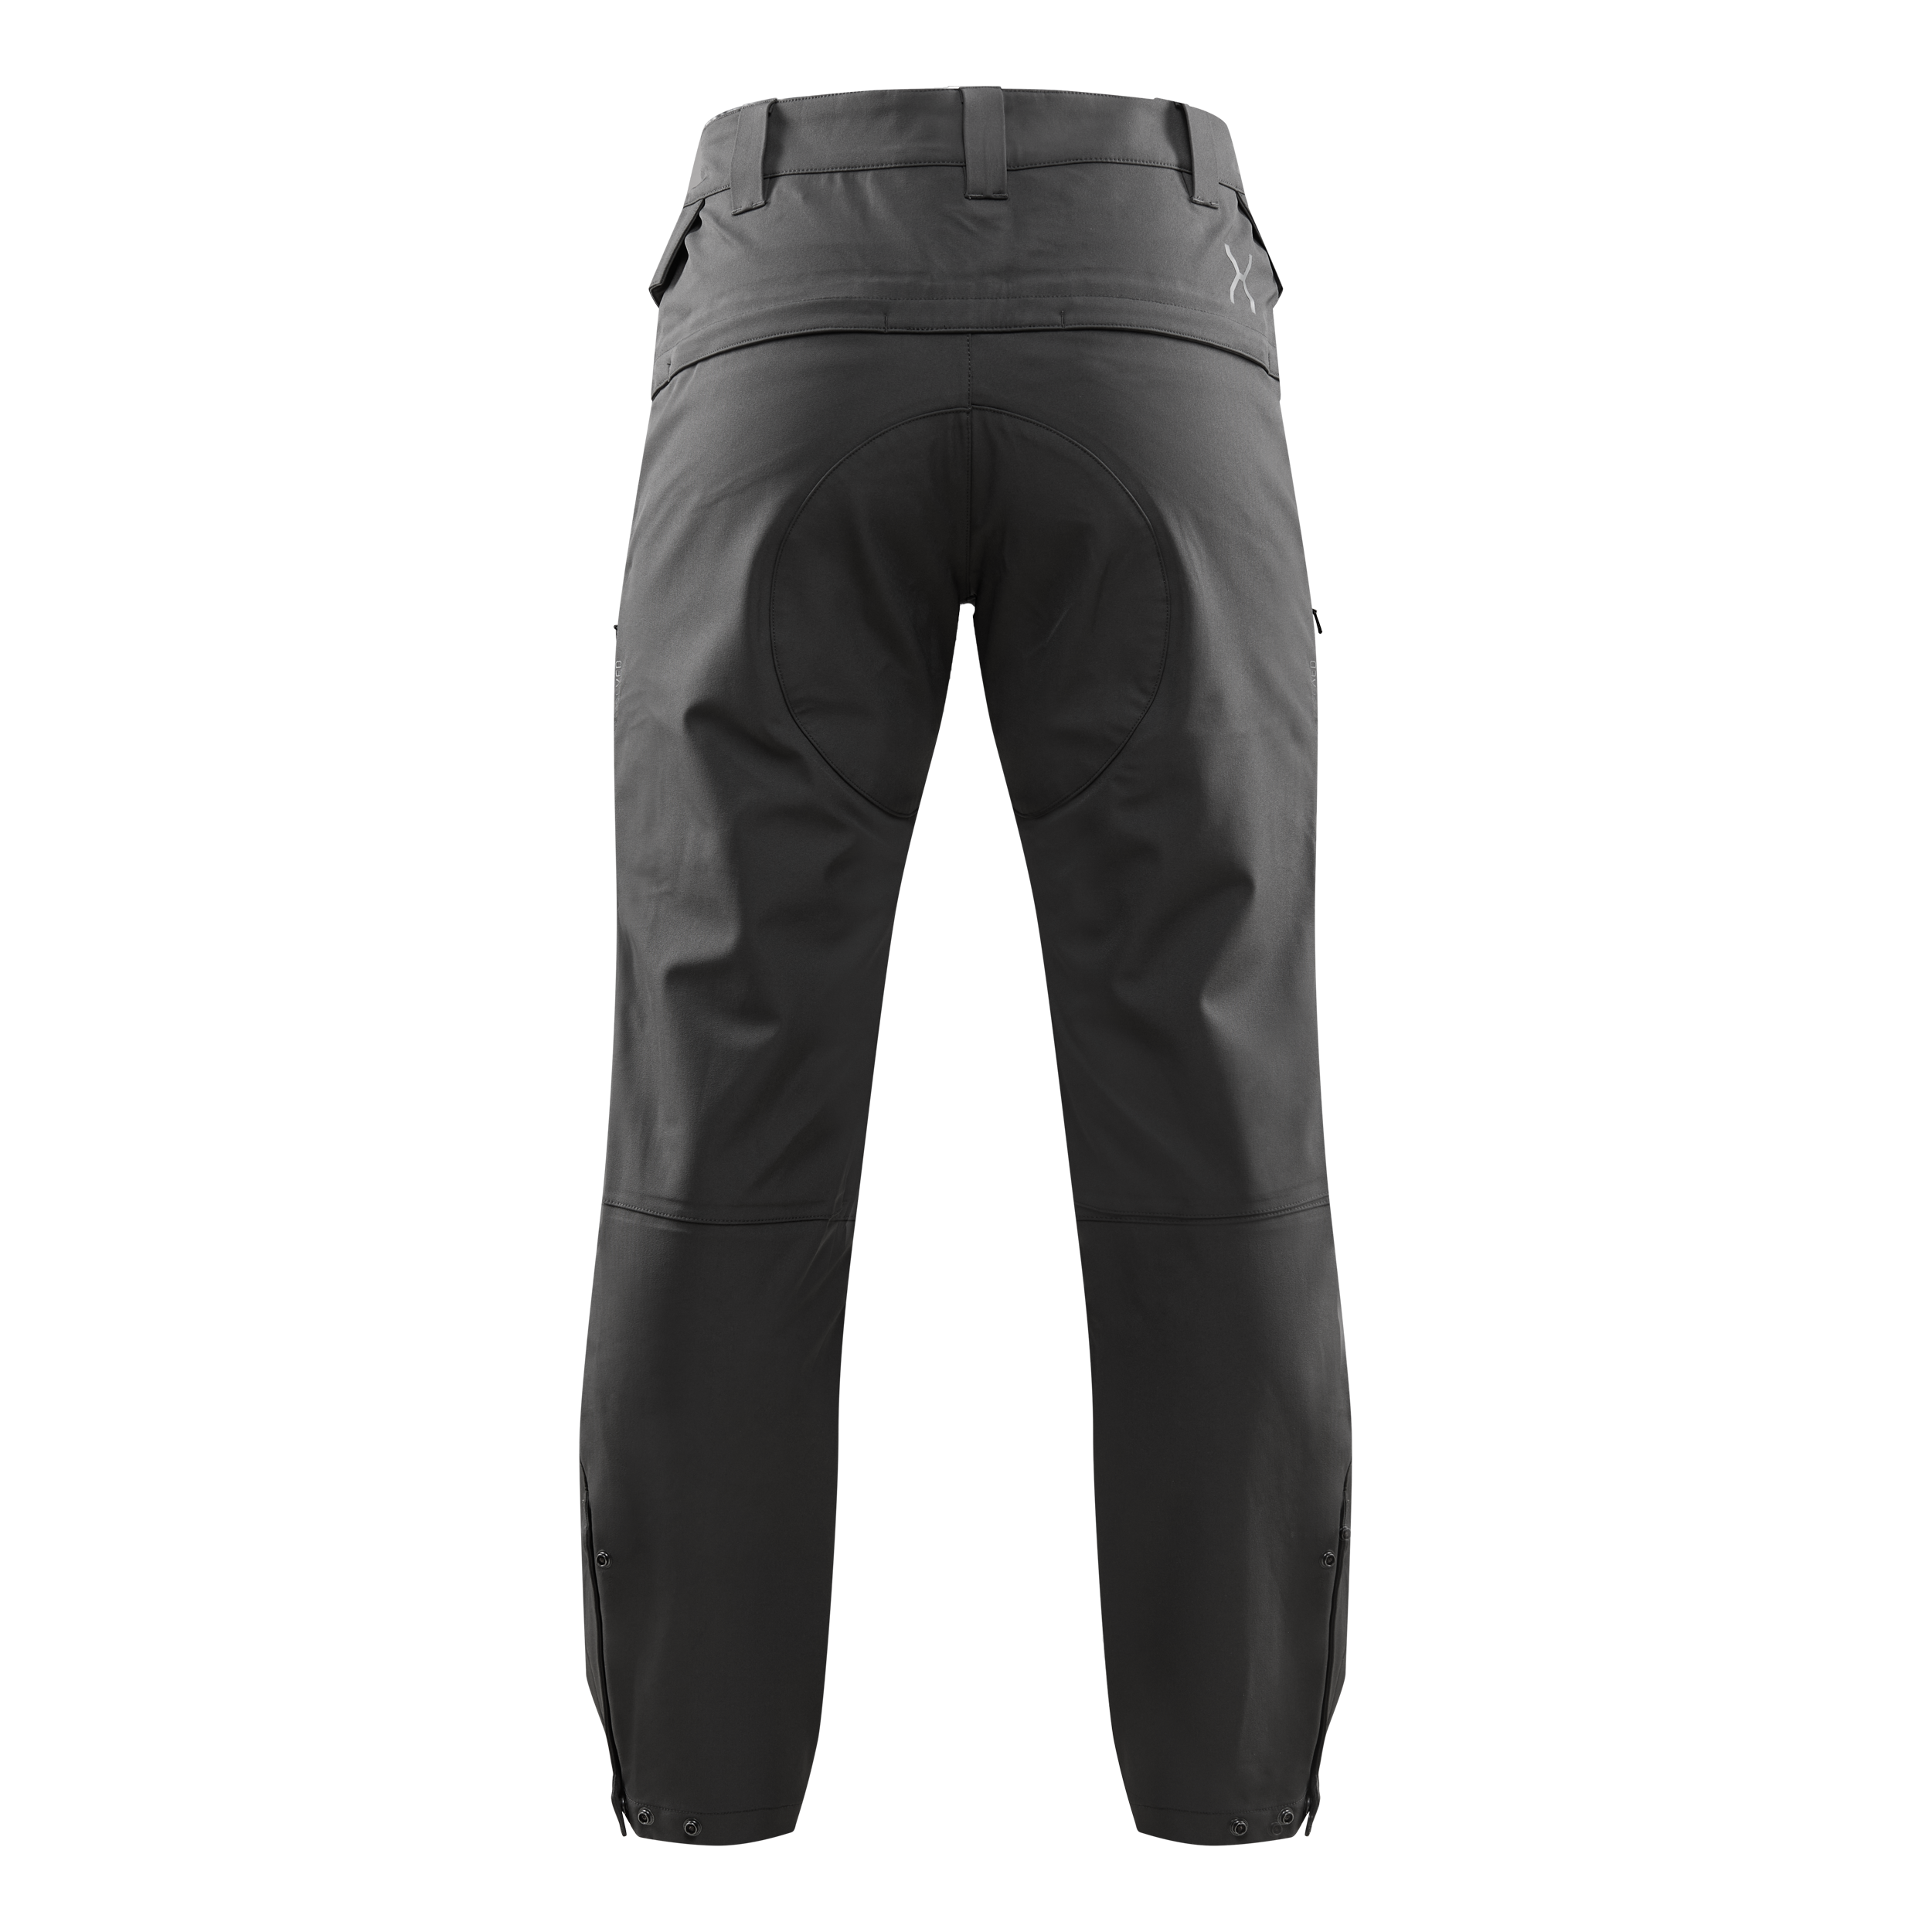 Expedition Pants / Everything Proof Series by Graphene-X - Graphene X